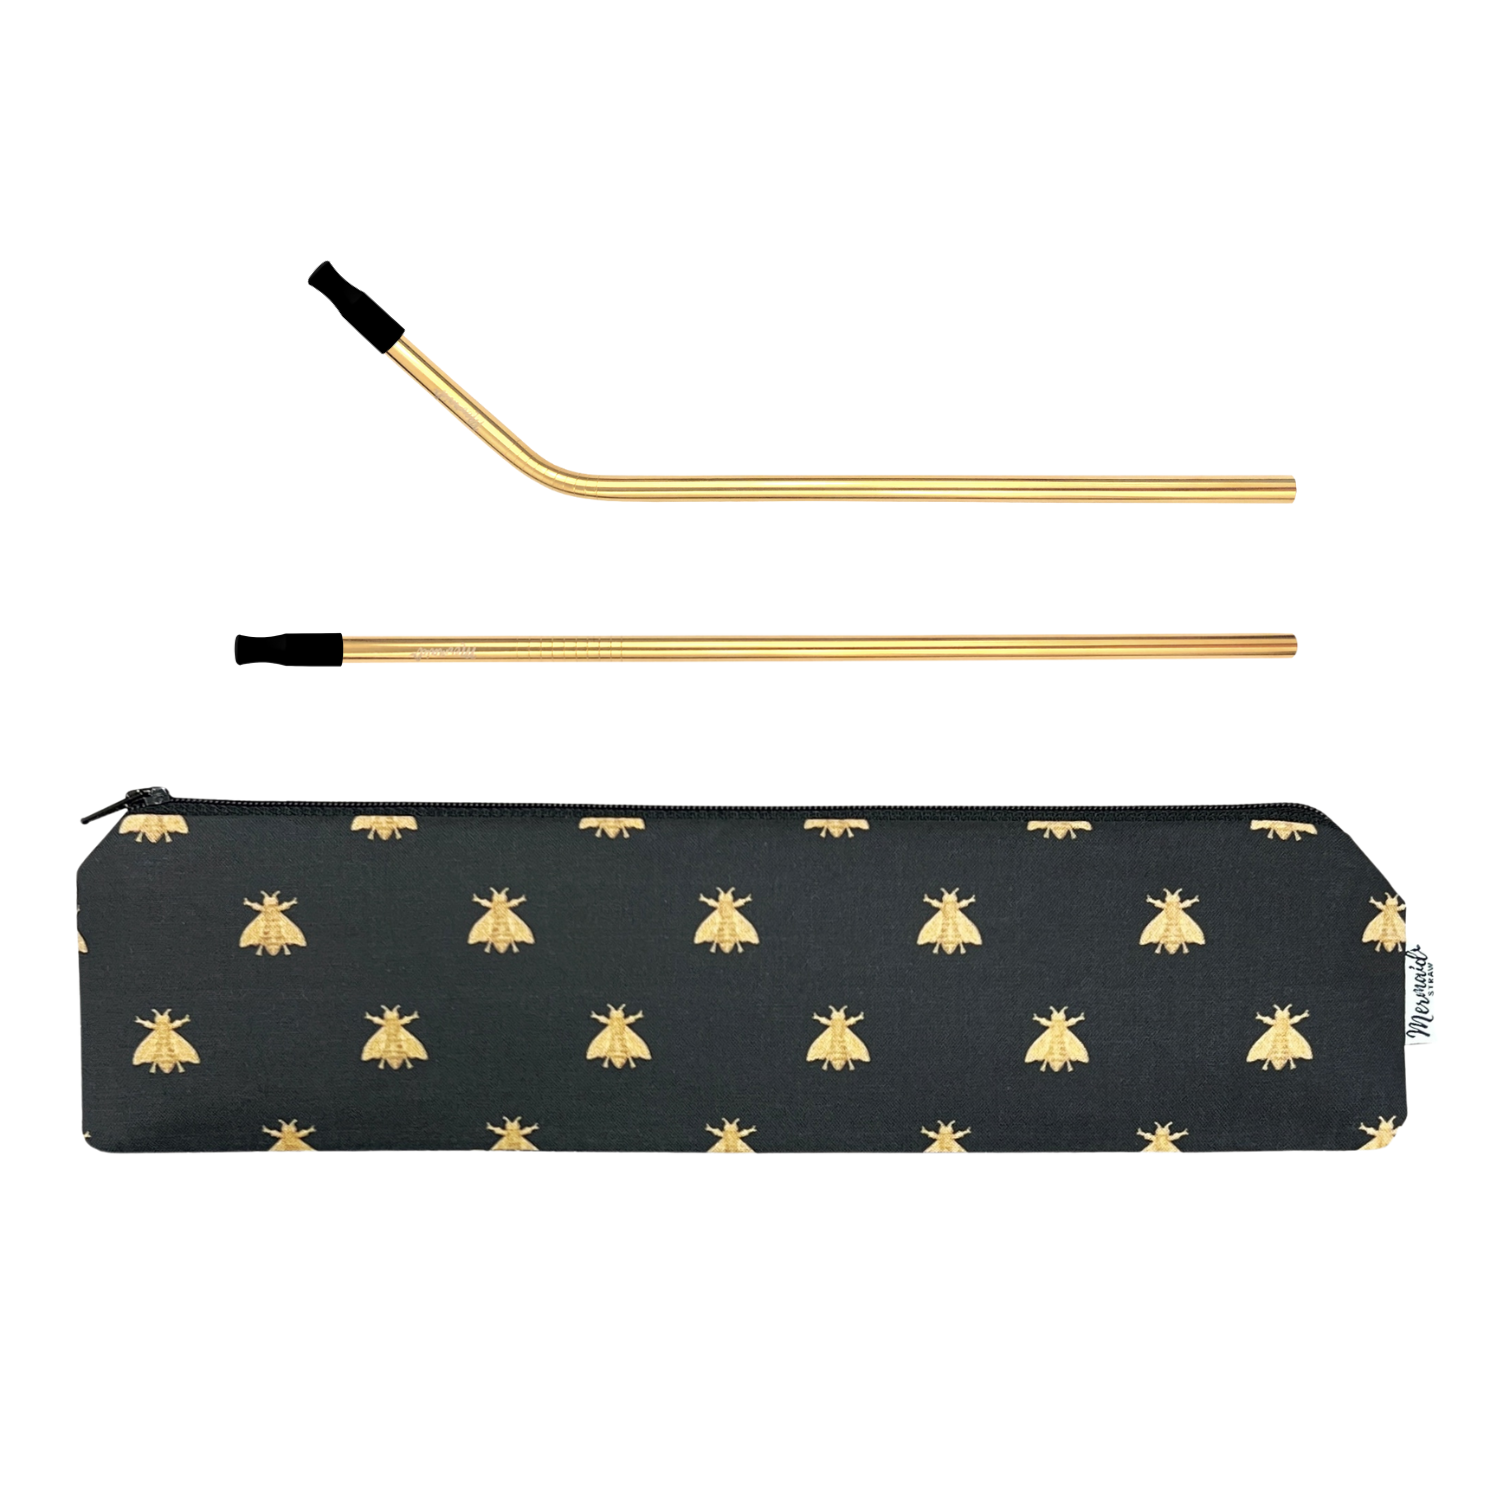 Mermaid Straw Gilded Bees Zipper Pouch with Gold Stainless Steel Straws and 6mm black silicone tips